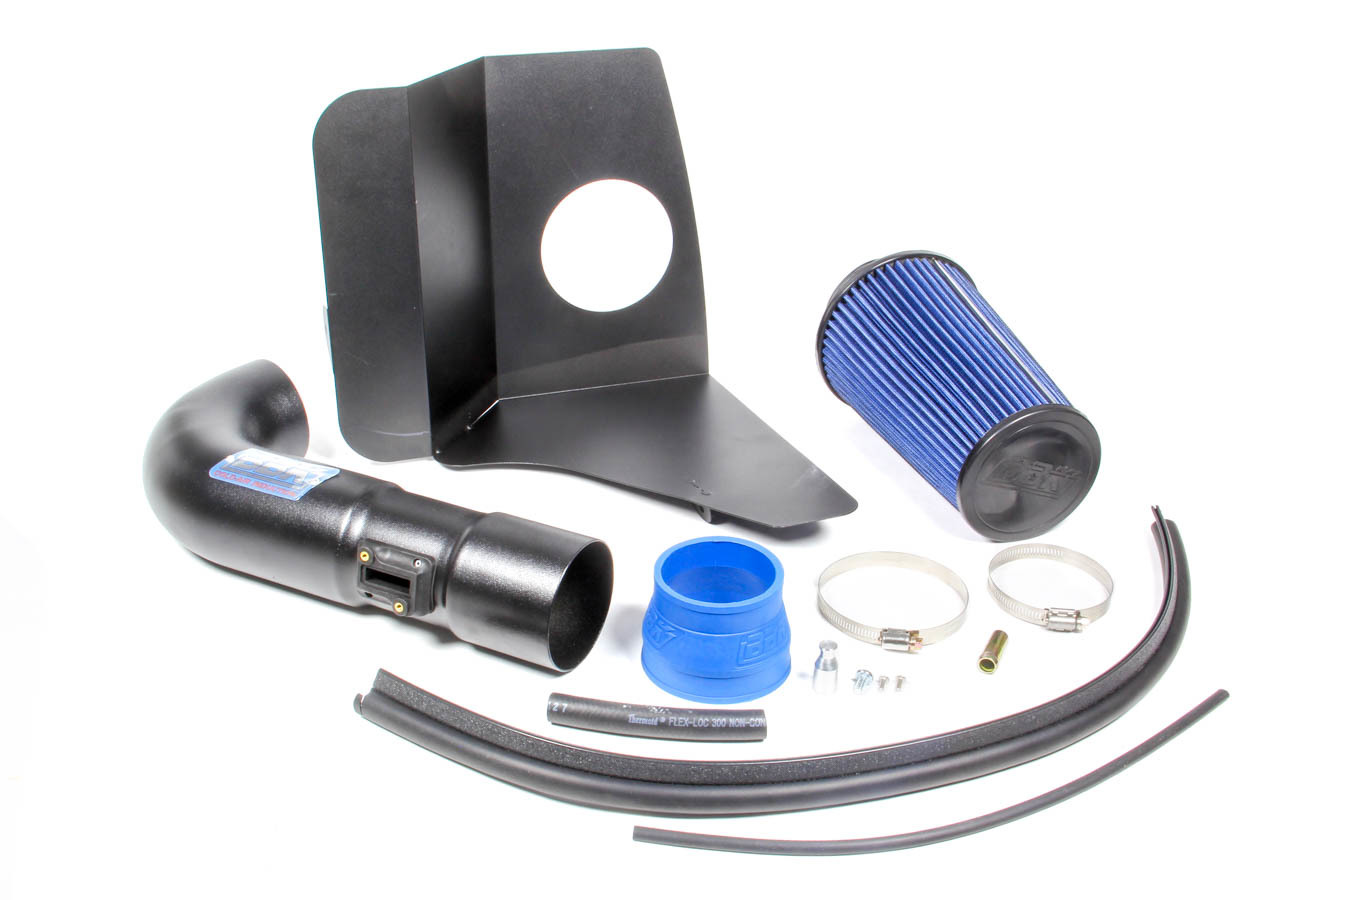 BBK Performance 18355 Air Induction System, Power Plug Black Out, Reusable Oiled Filter, Steel, Black Powder Coat, Chevy V6, Chevy Camaro 2012-15, Kit